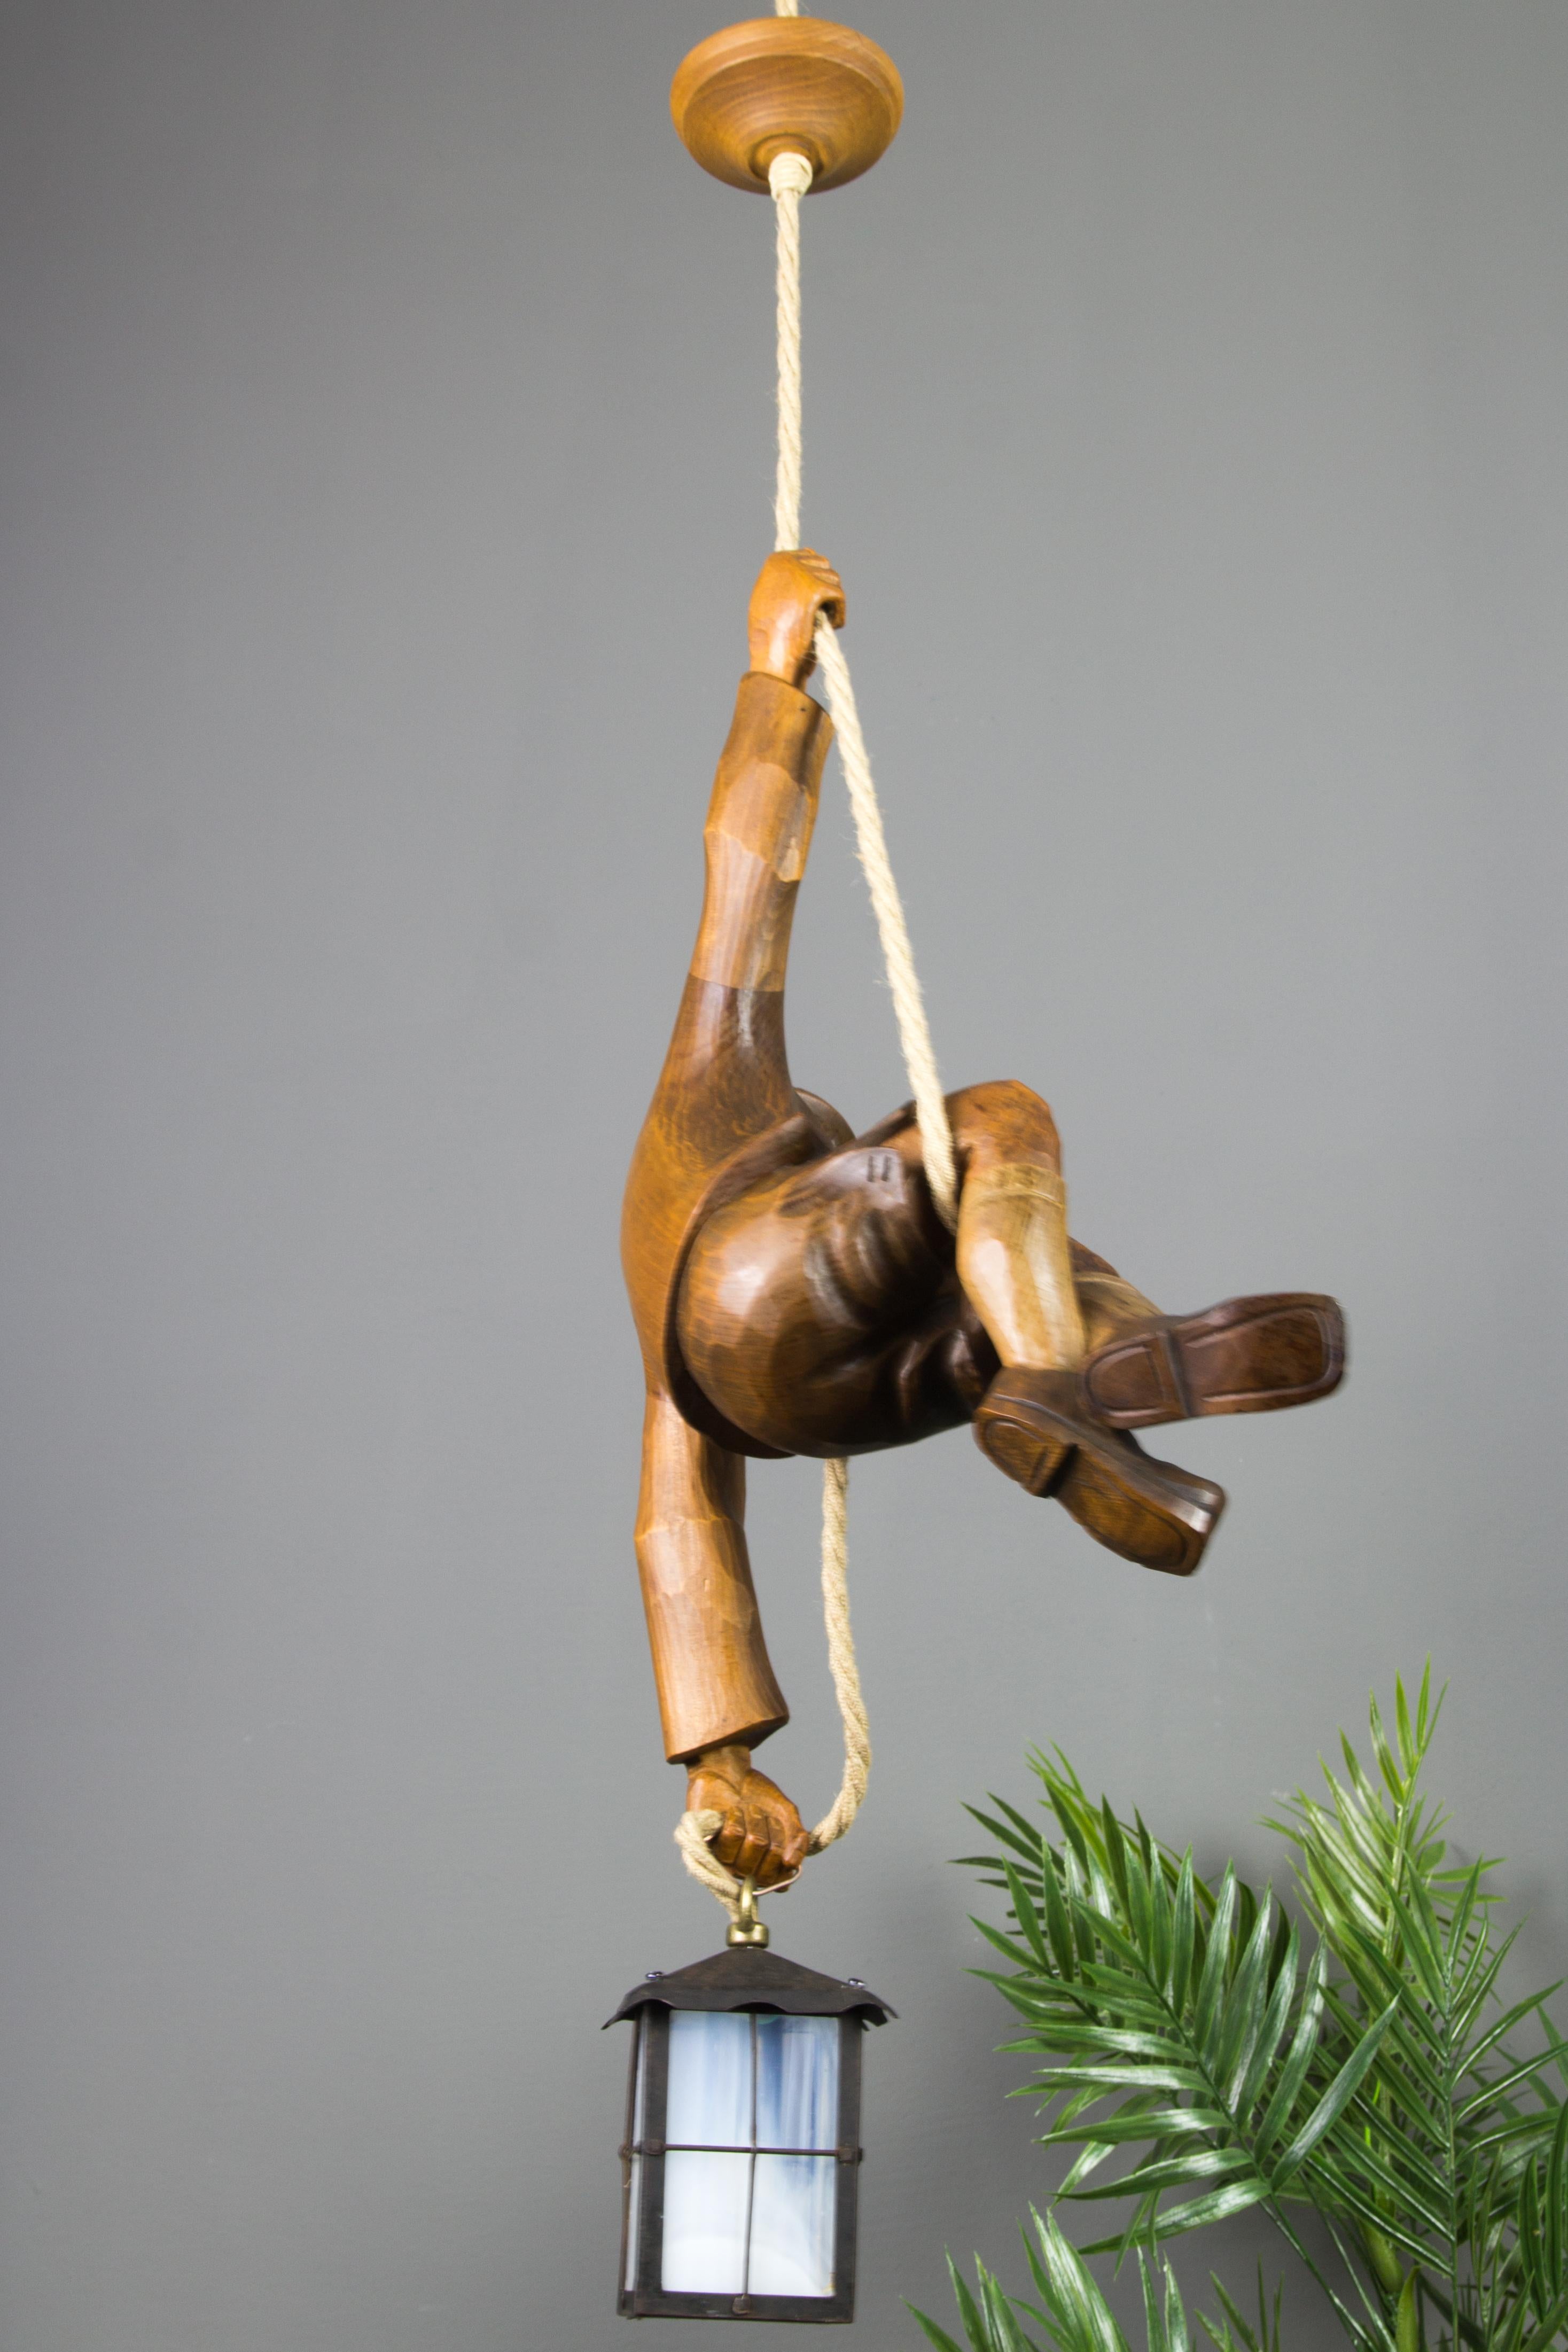 Hand-Carved Figural Pendant Light of a Hand Carved Wood Figure Mountain Climber with Lantern